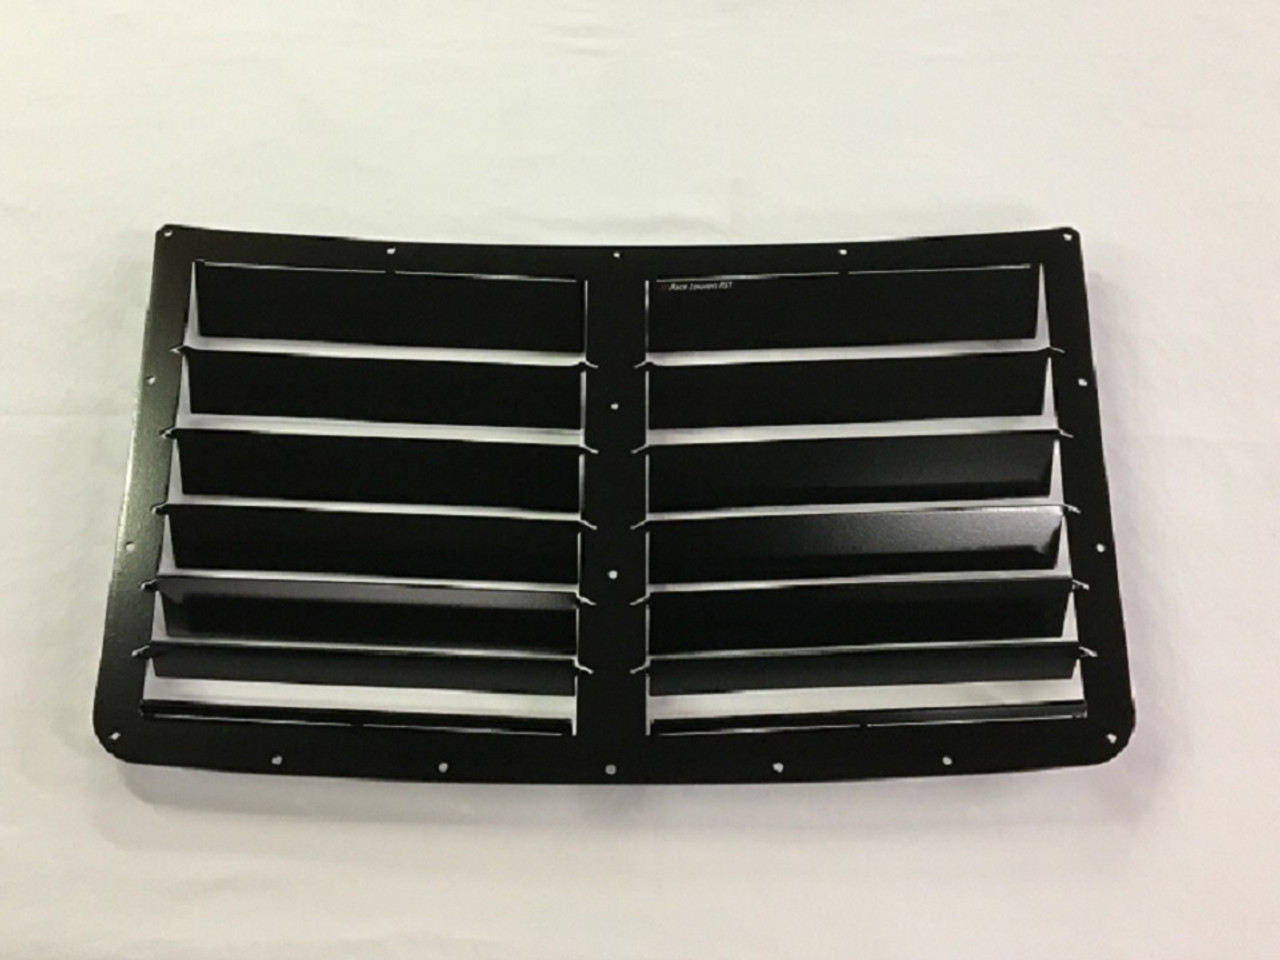 Race Louver RST Truck Trim hood vent is designed for maximum cooling